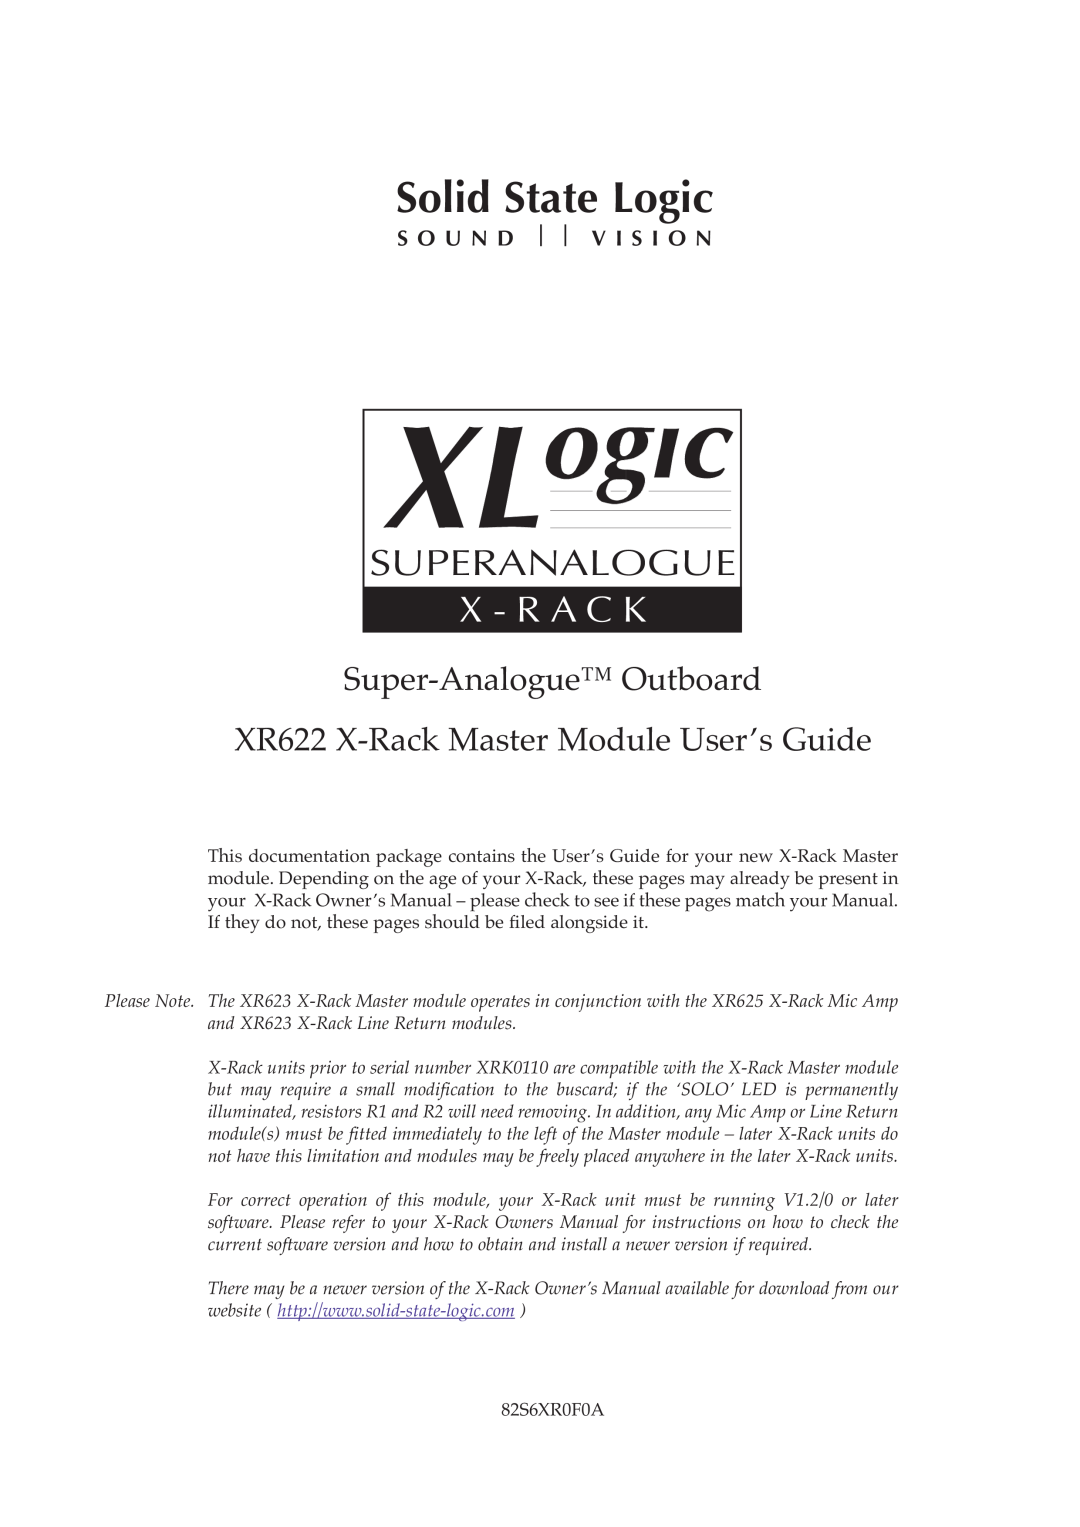 Solid State Logic owner manual Solid State Logic, Superanalogue, X - R A C K, XR622 X-RackMaster Module User’s Guide 